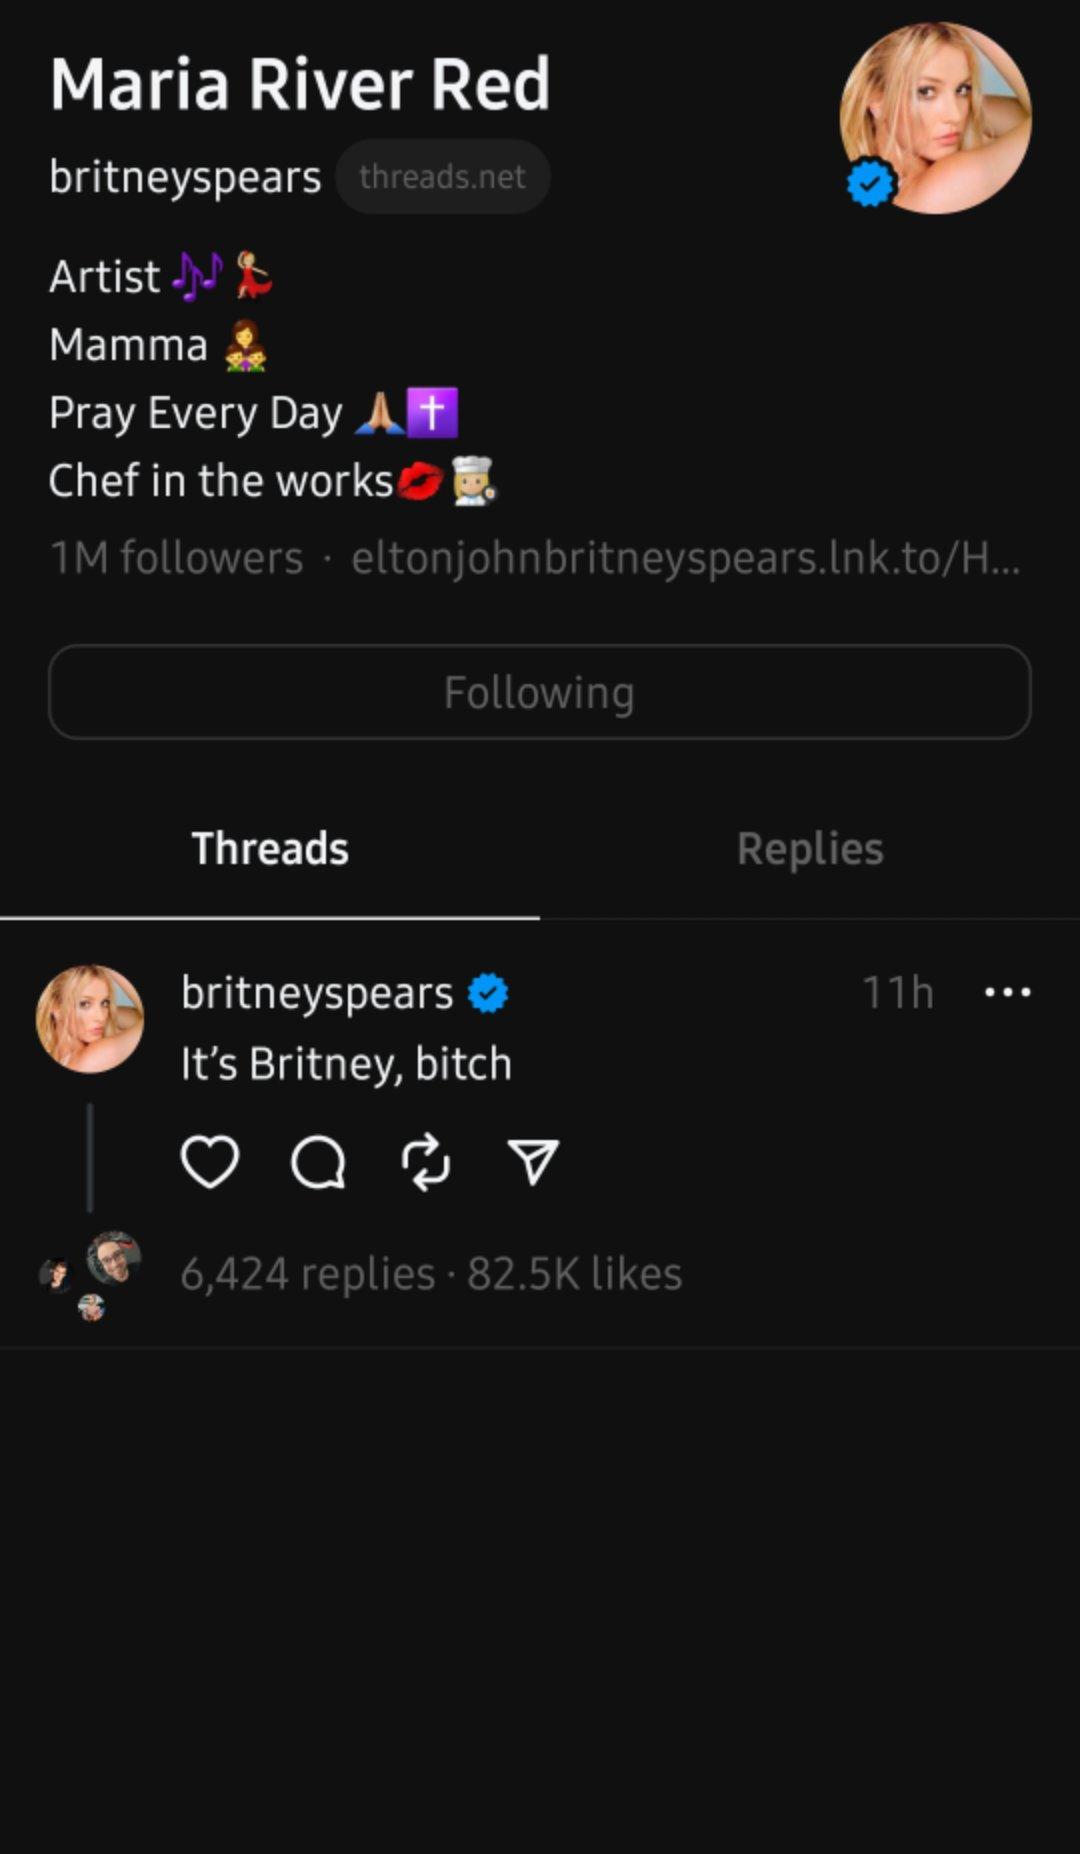 Britney Spears joins Threads